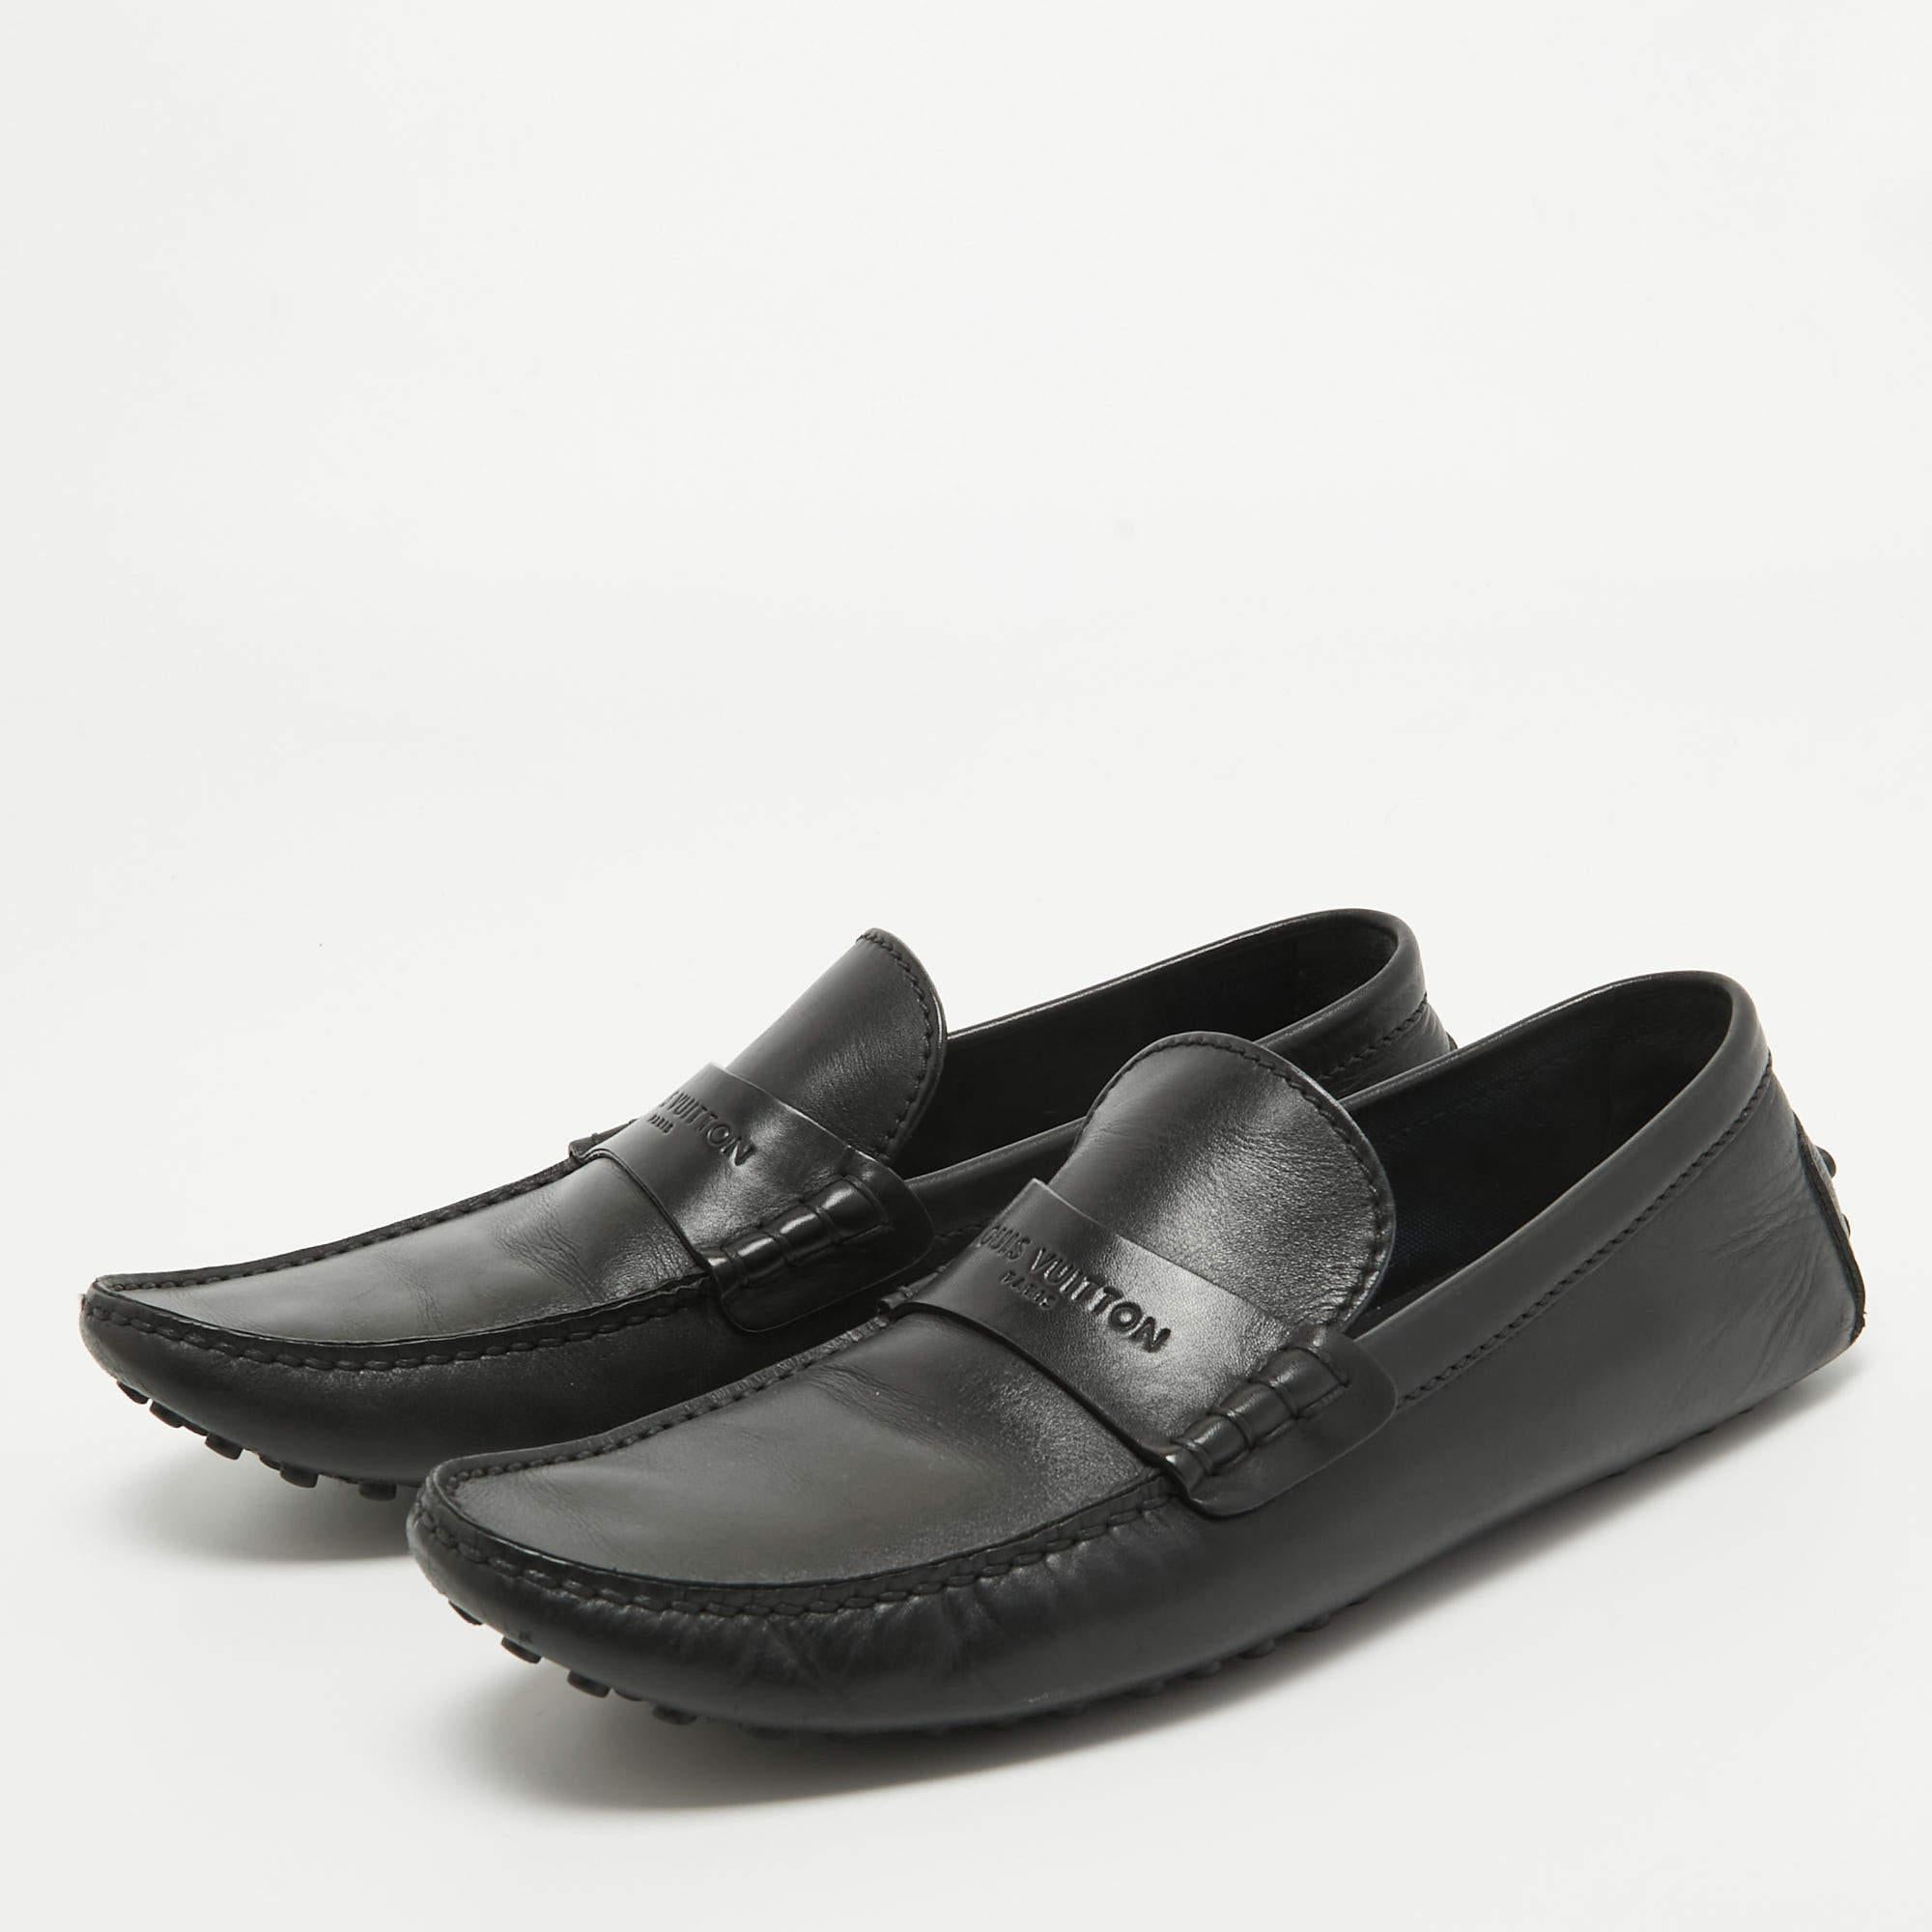 Louis Vuitton Black Leather Slip On Loafers Size 42.5 For Sale 4